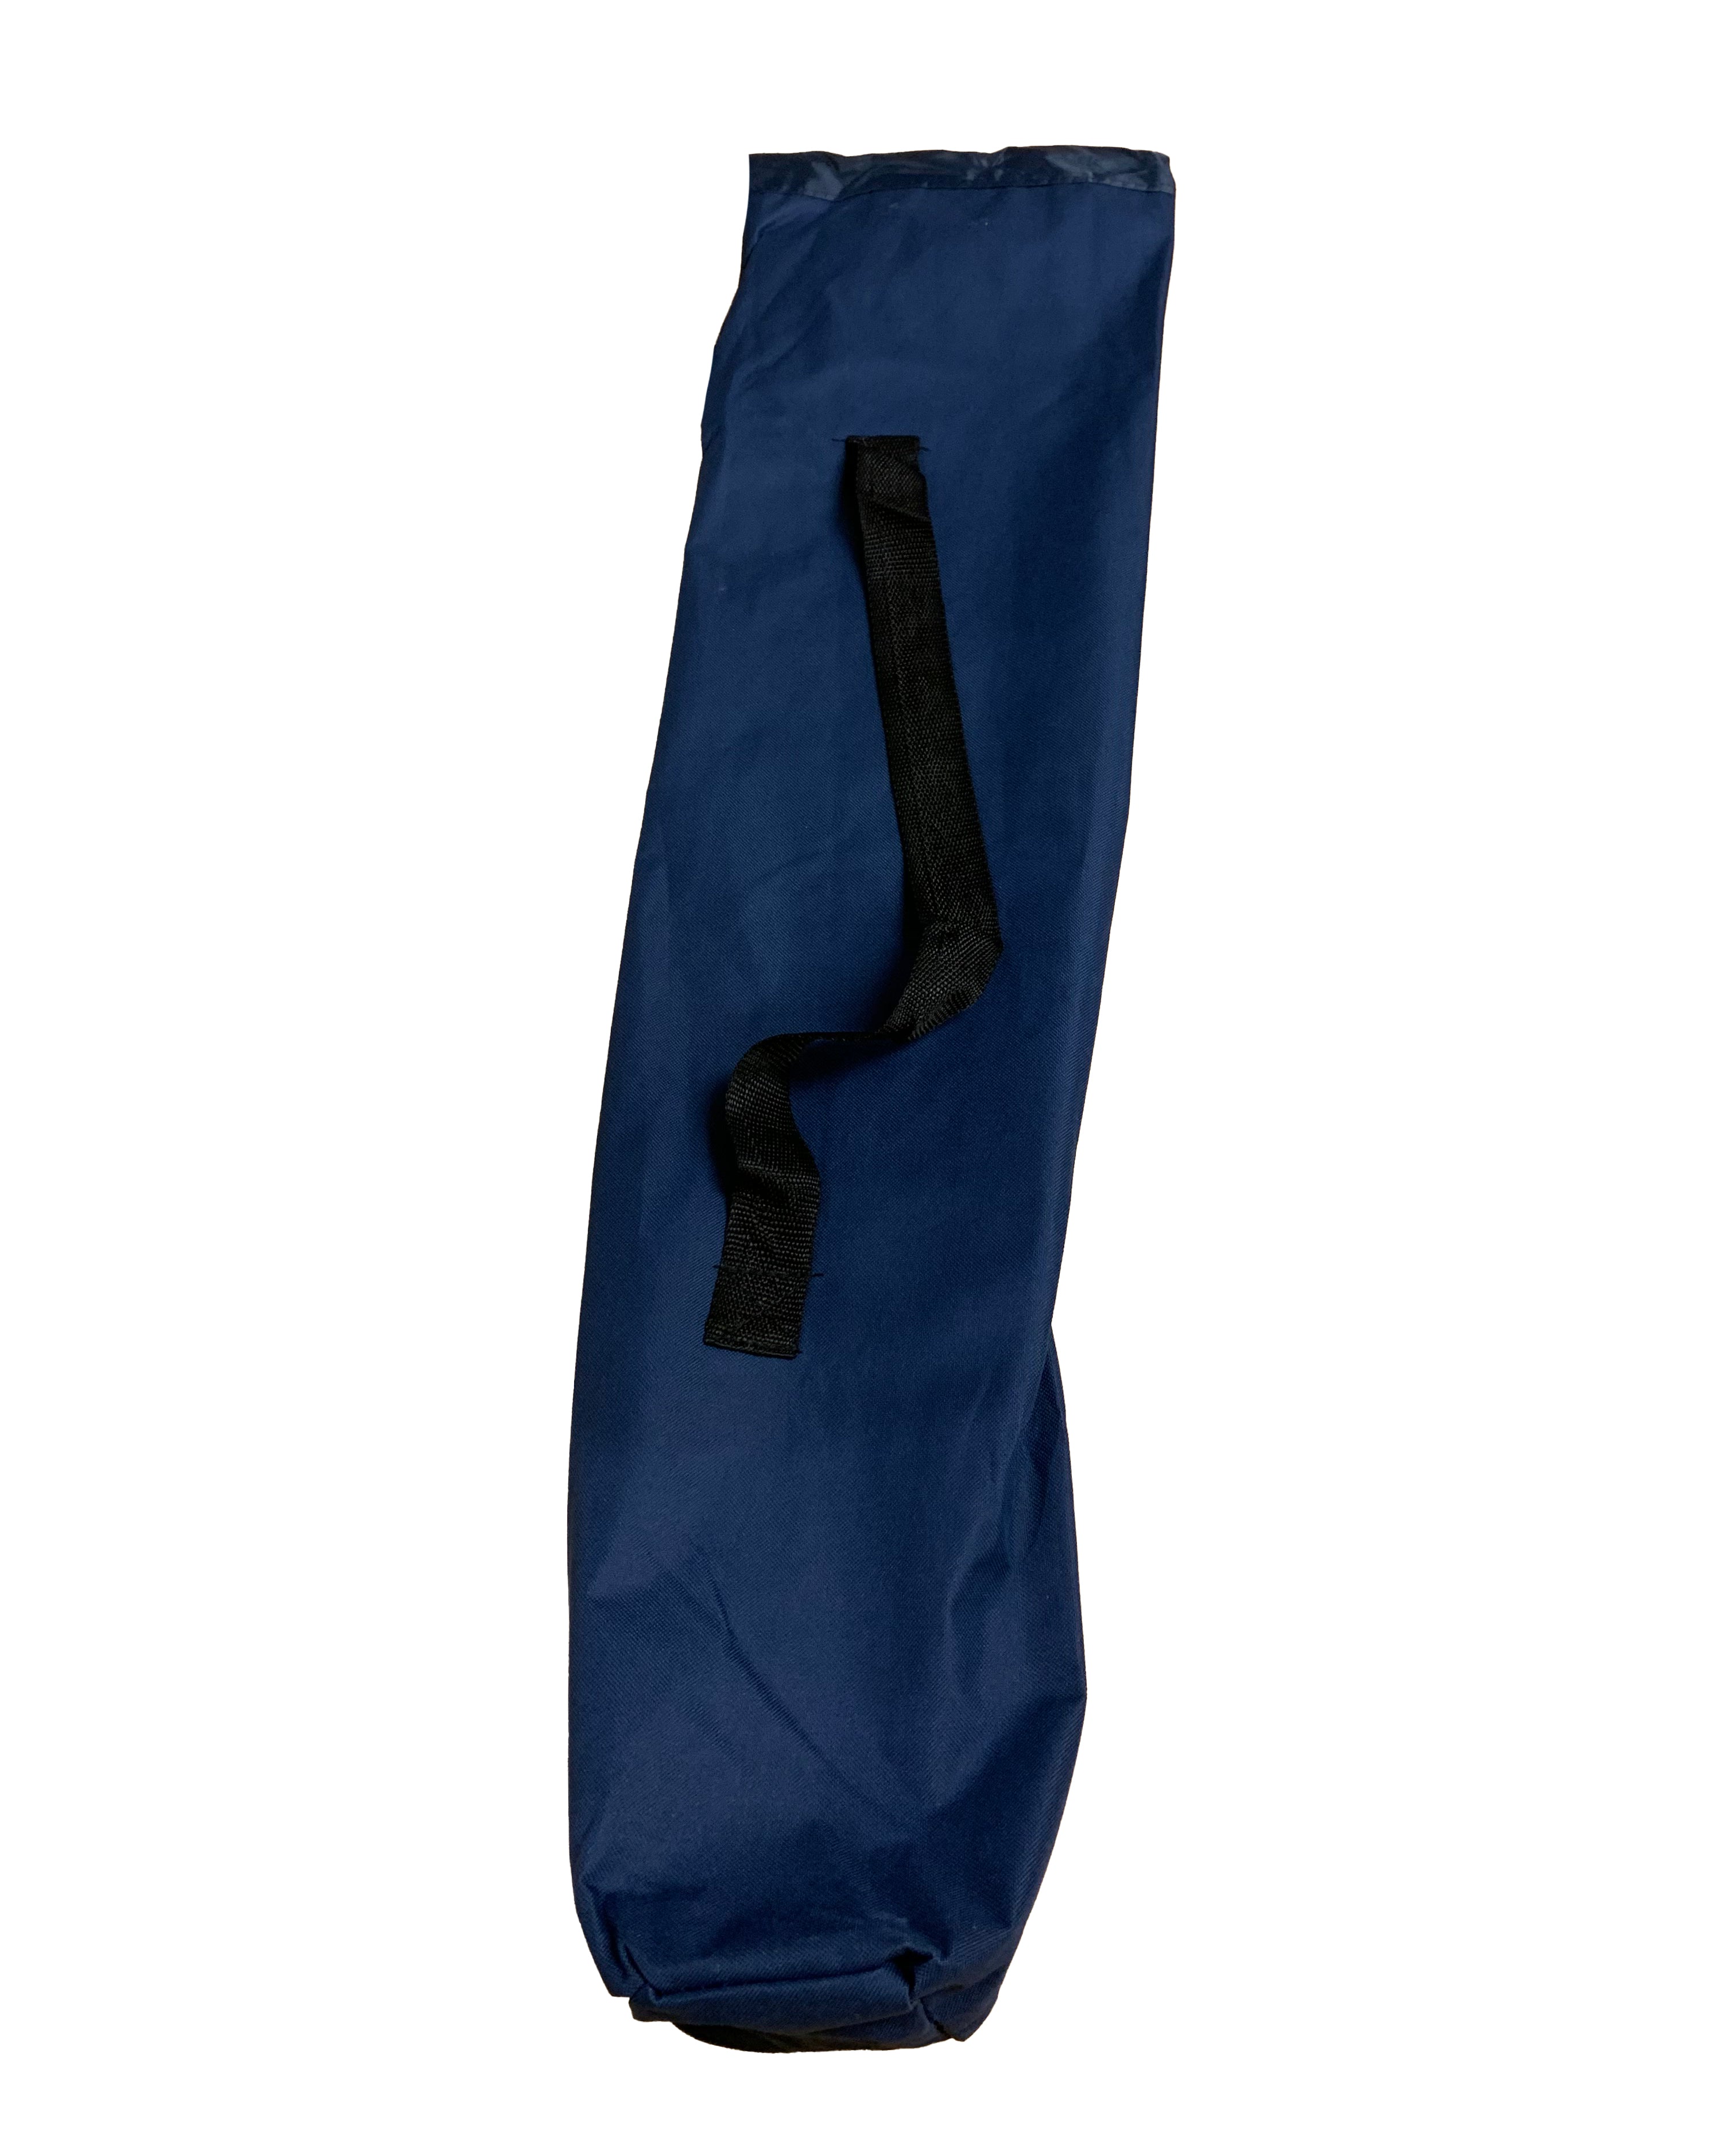 Peddie Folding Lawn Chair with Carrying Bag